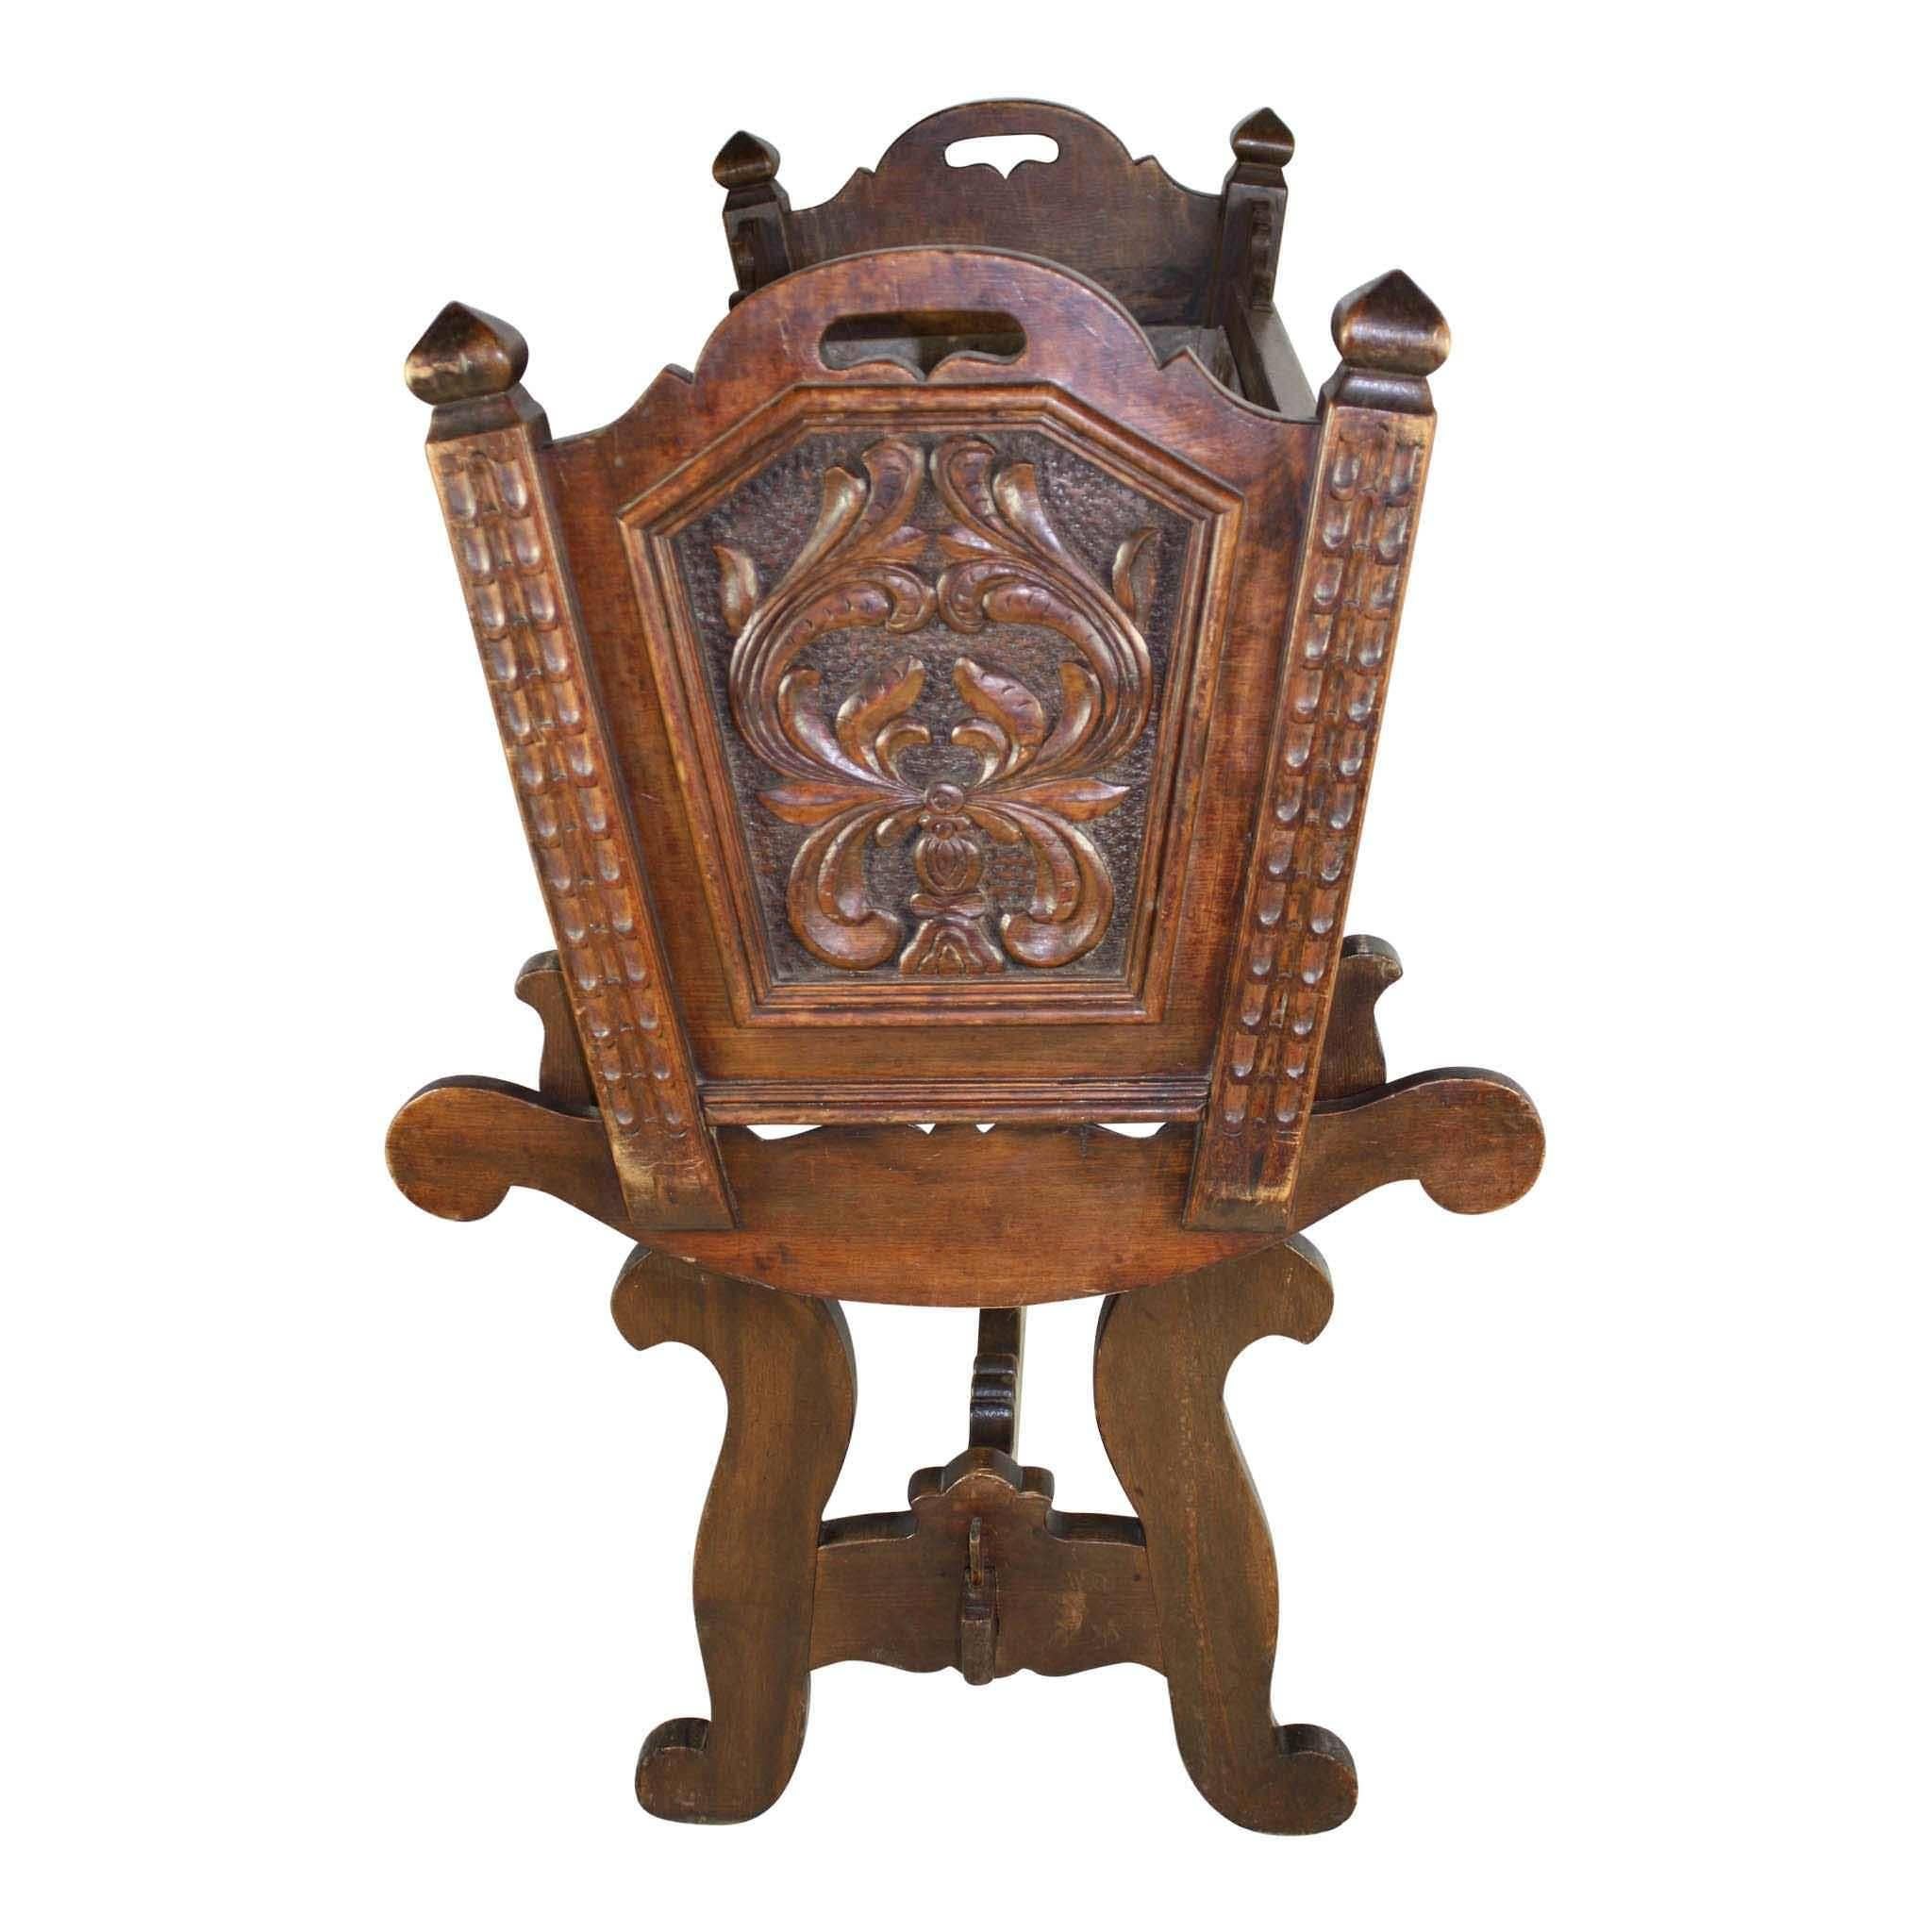 20th Century Swiss Carved Walnut Planter or Cradle with Stand, circa 1910